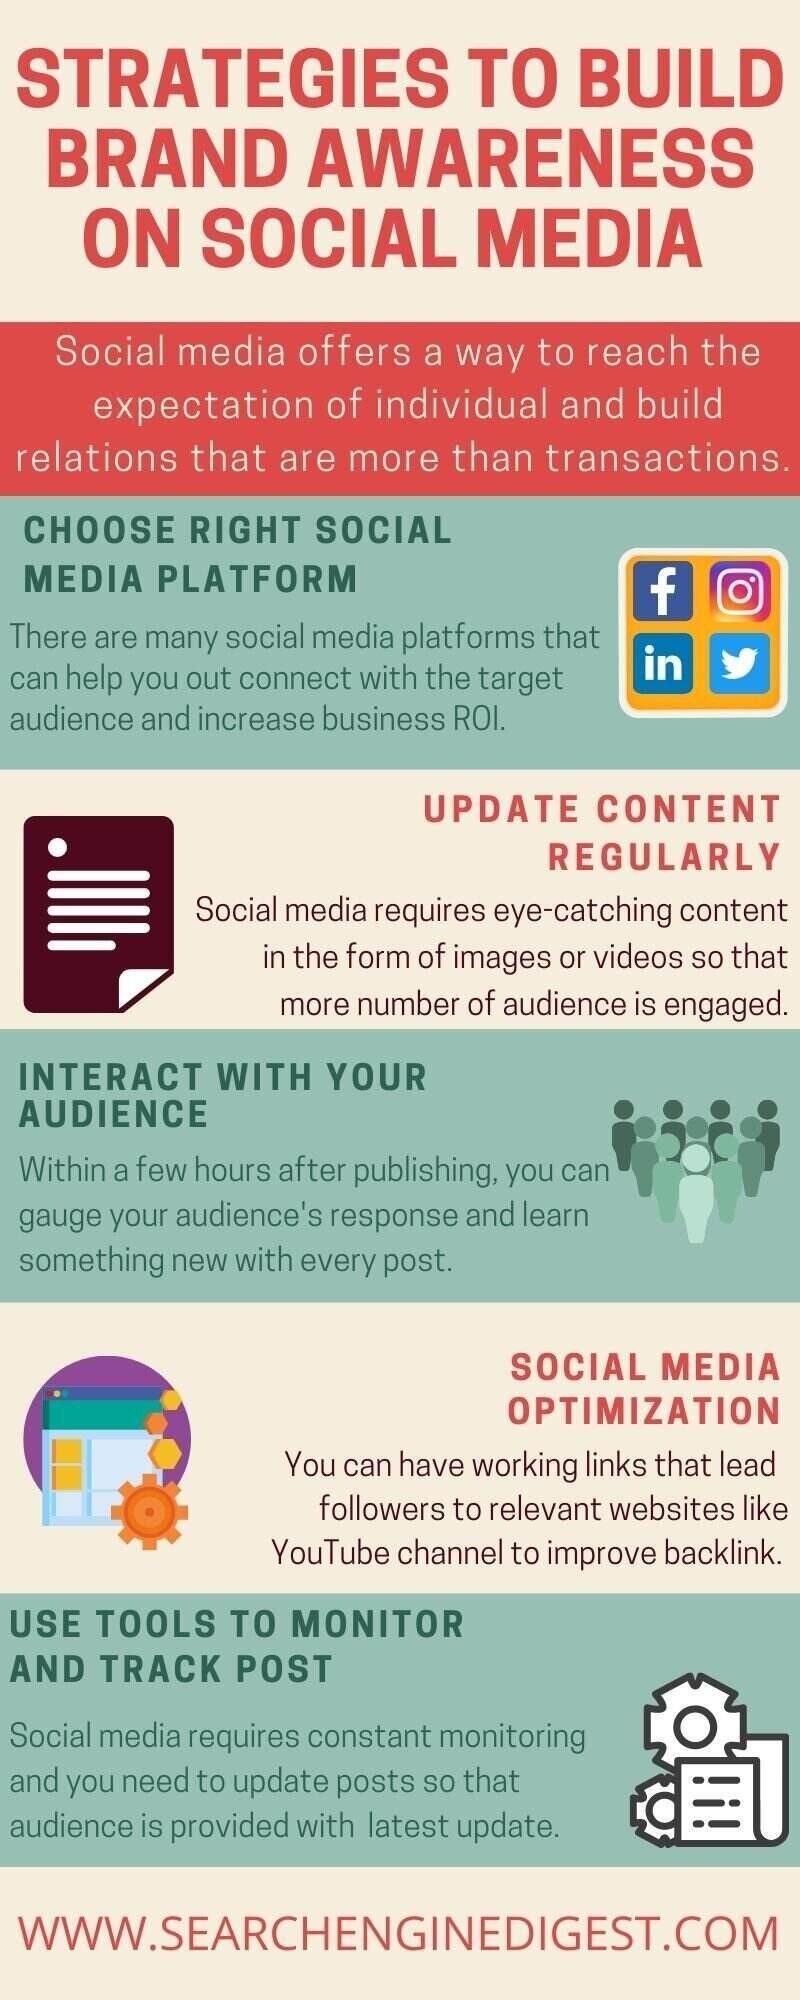 Strategies to build brand awareness on social media infographic